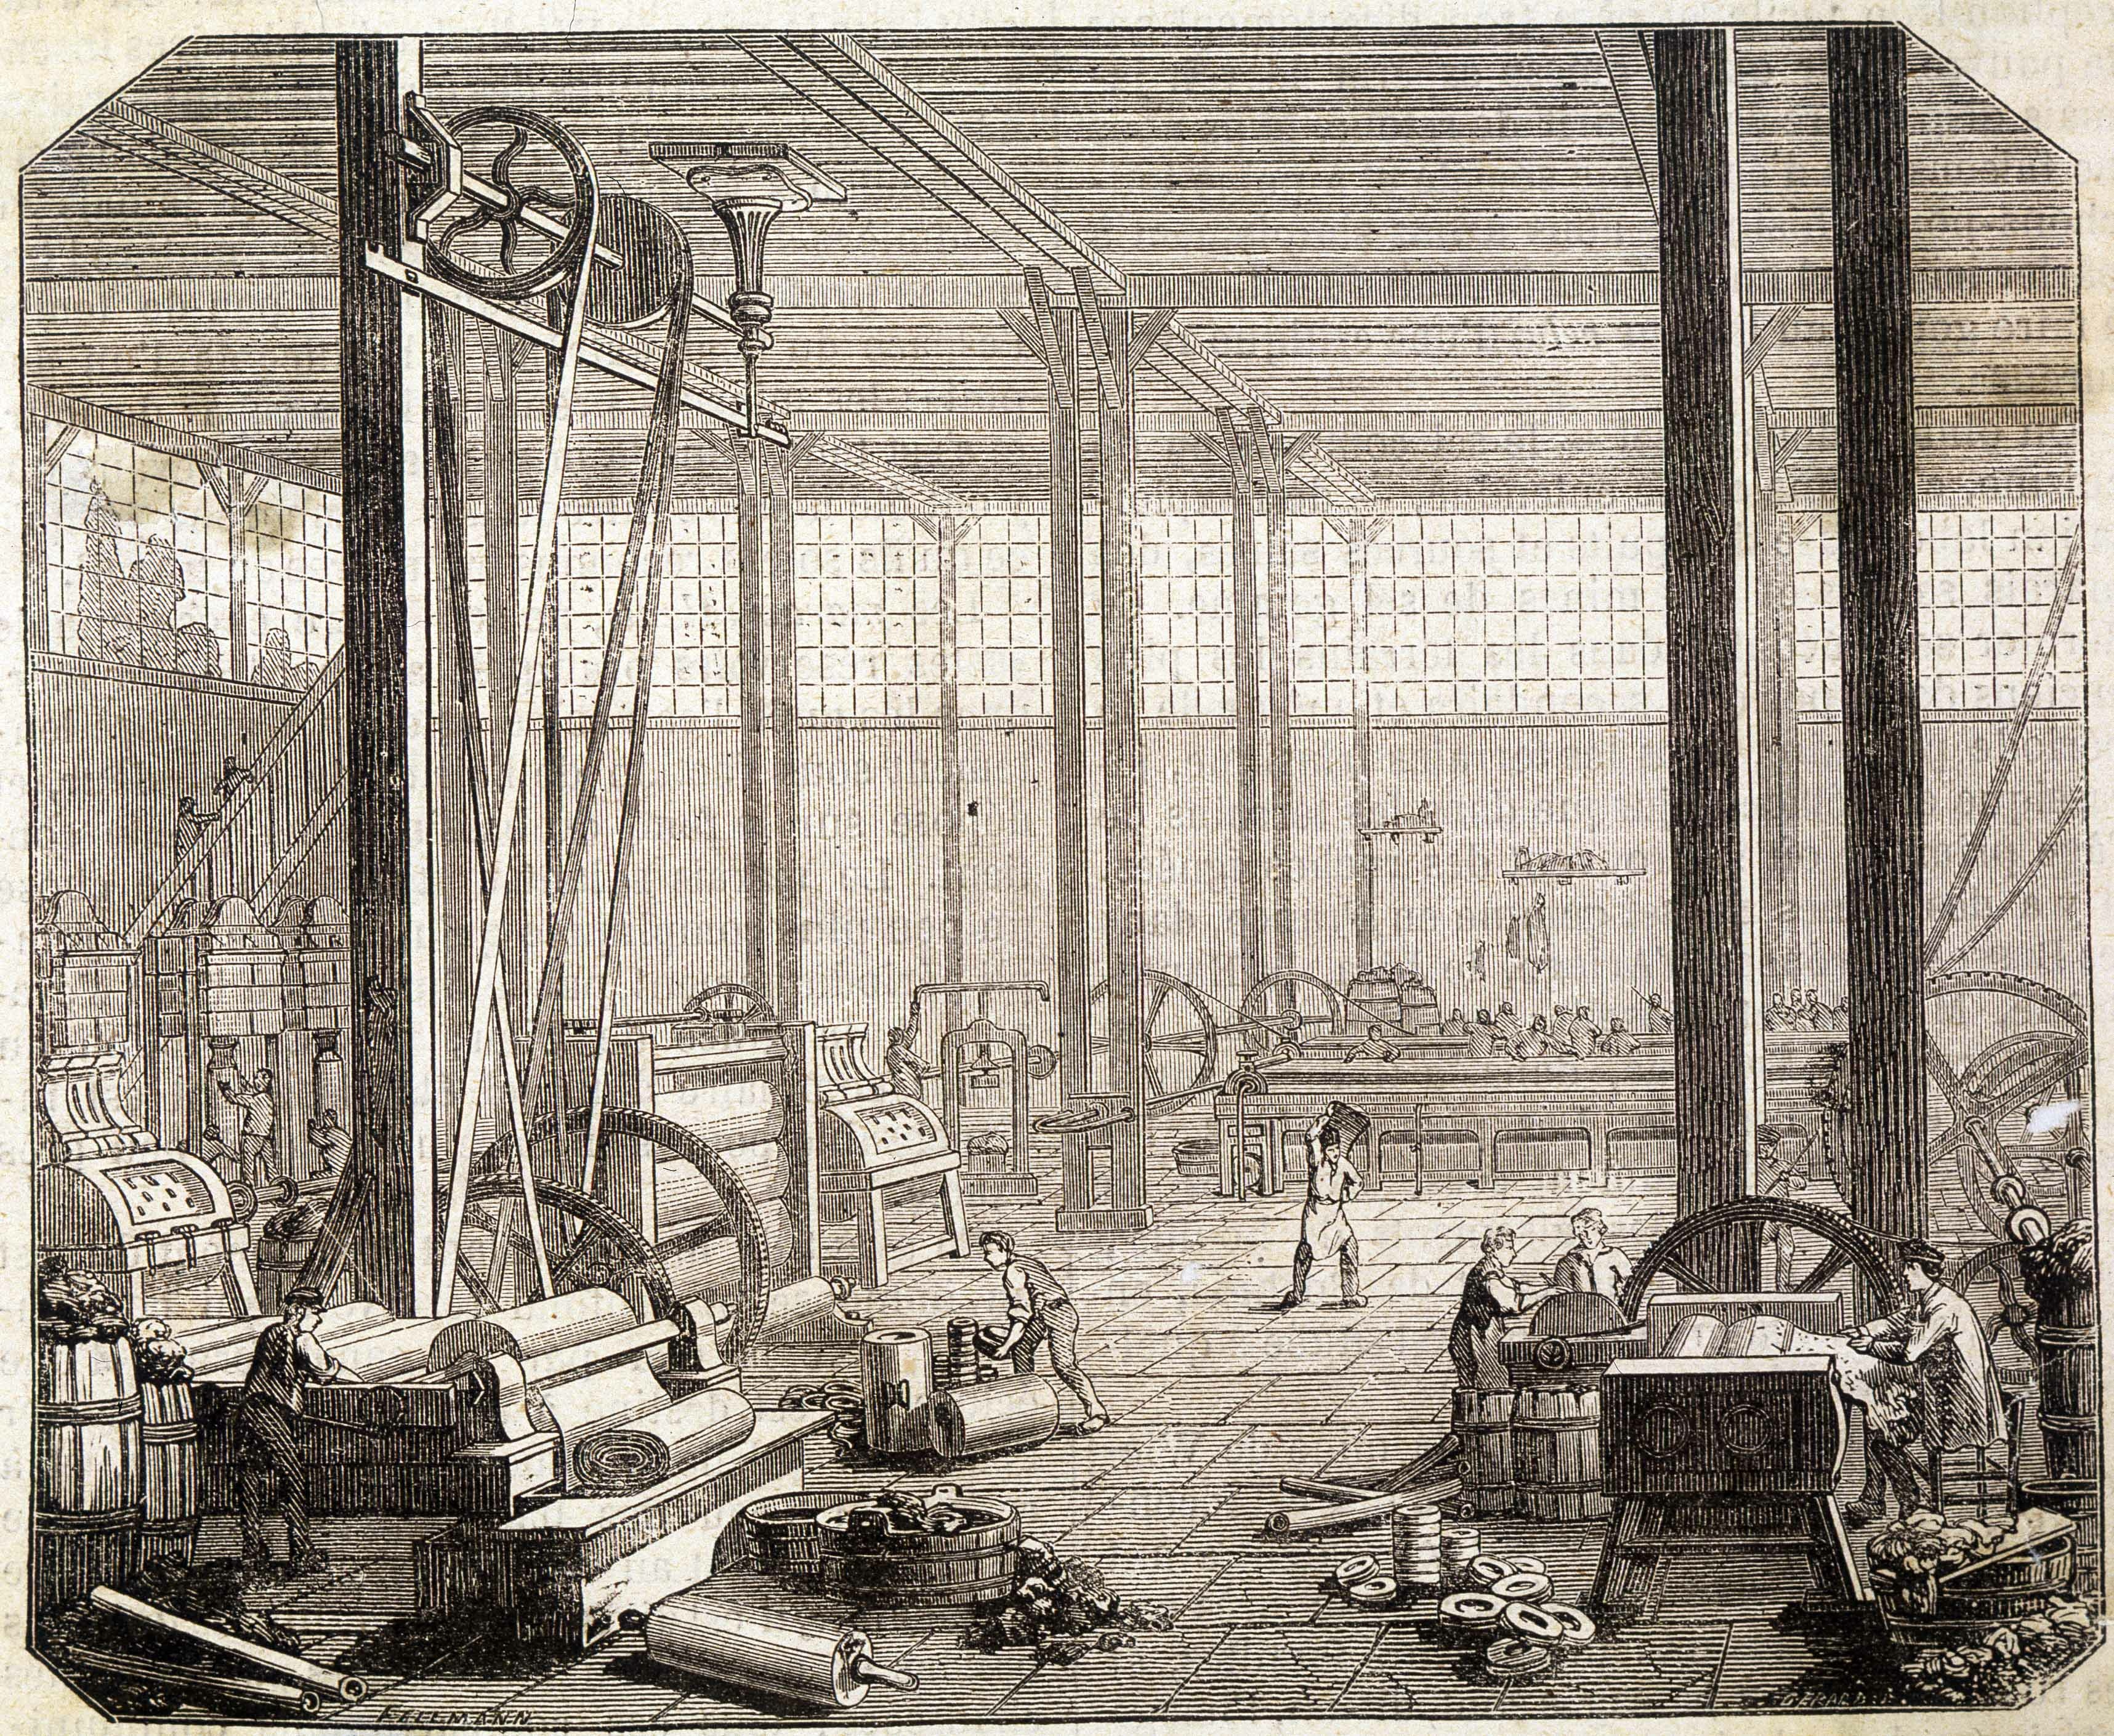 a French rubber factory circa 1899